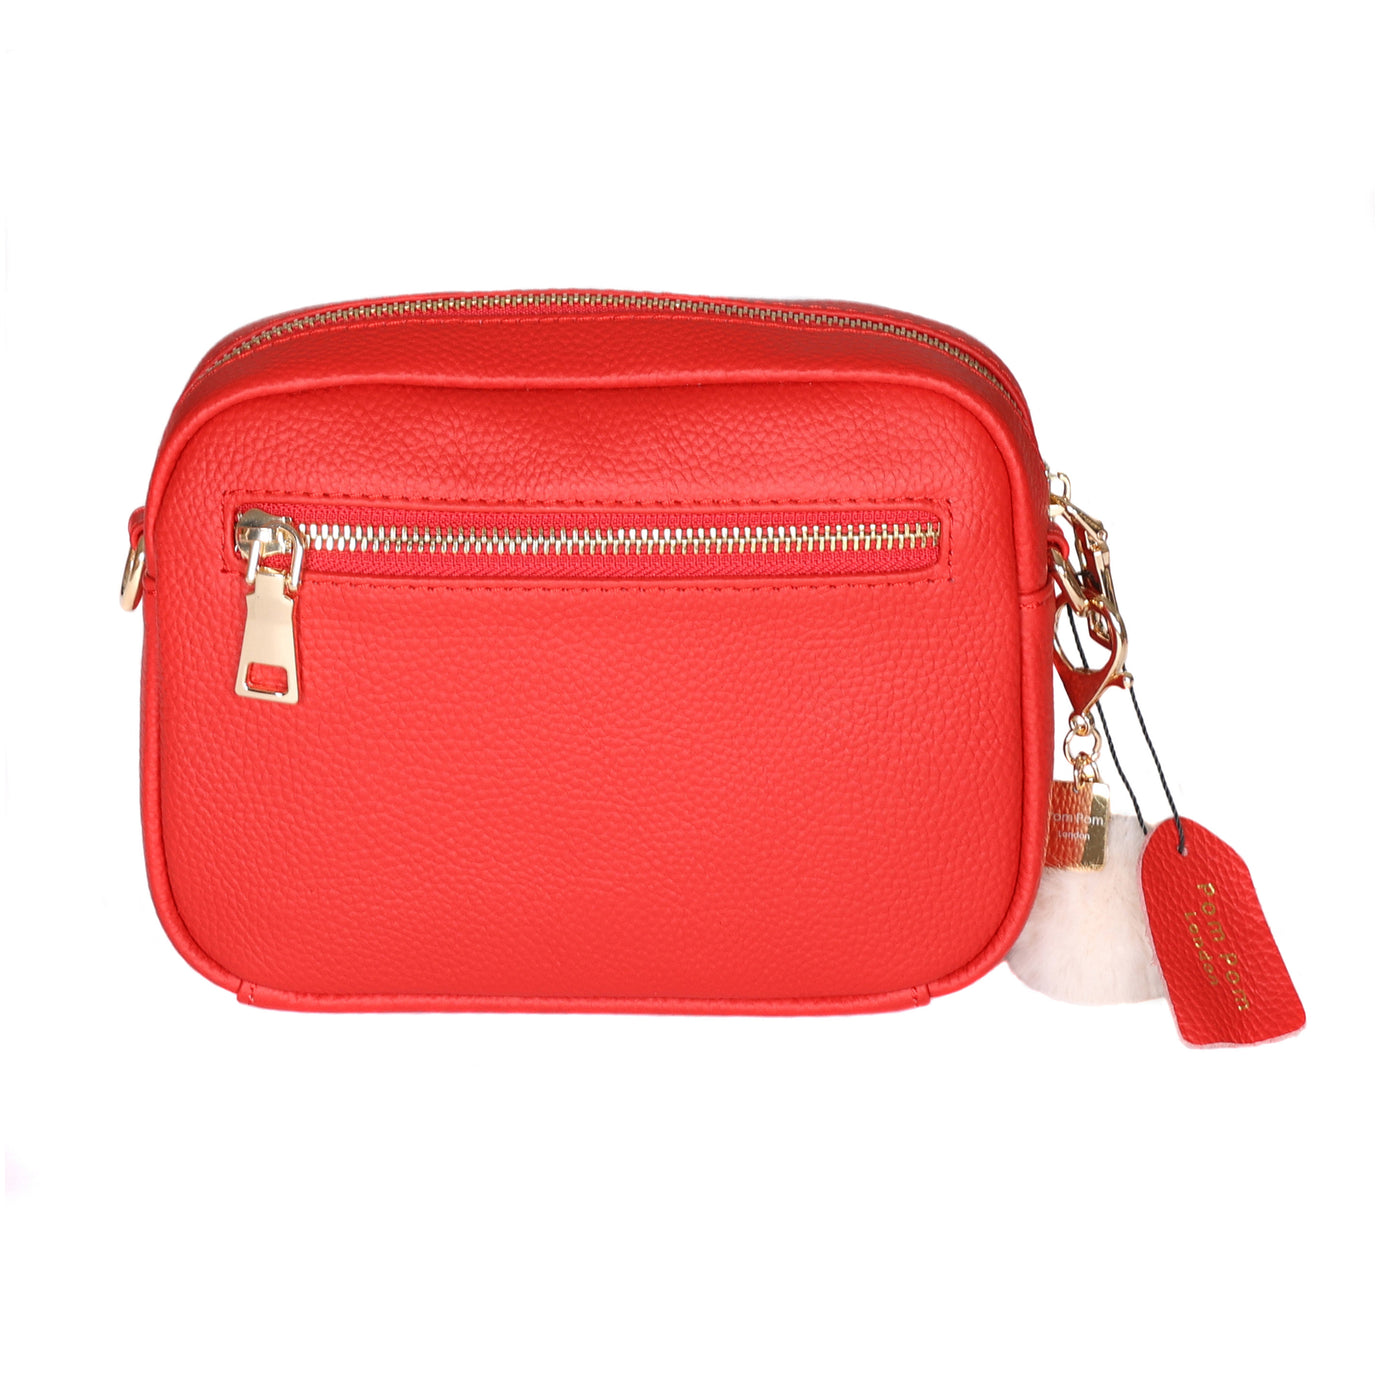 Mayfair Bag Red & Accessories